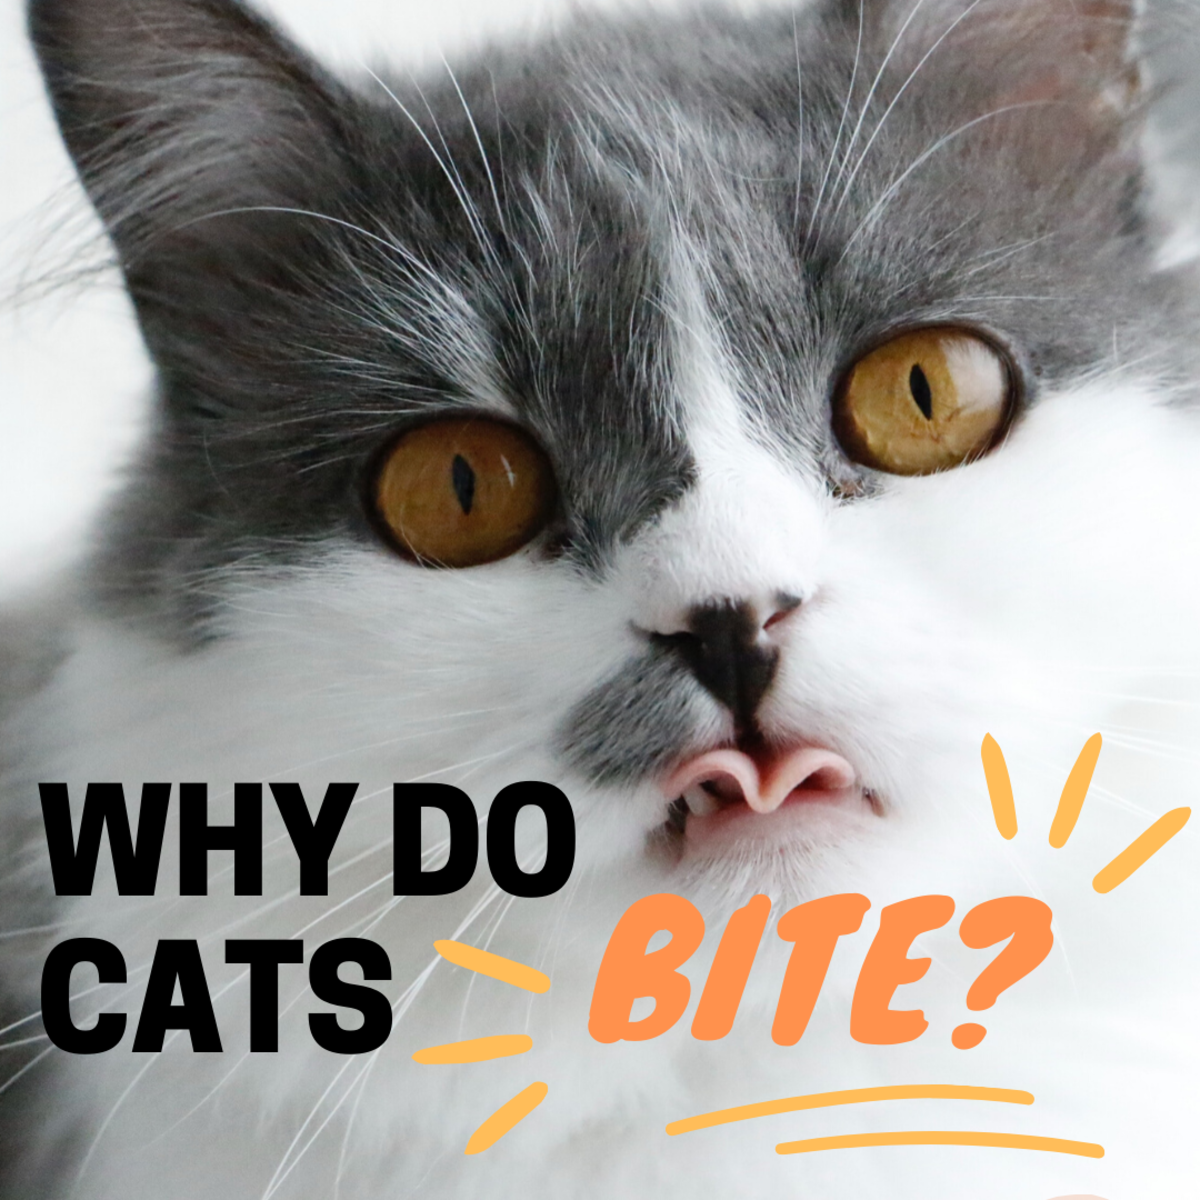 Find out why cats bite their owners.